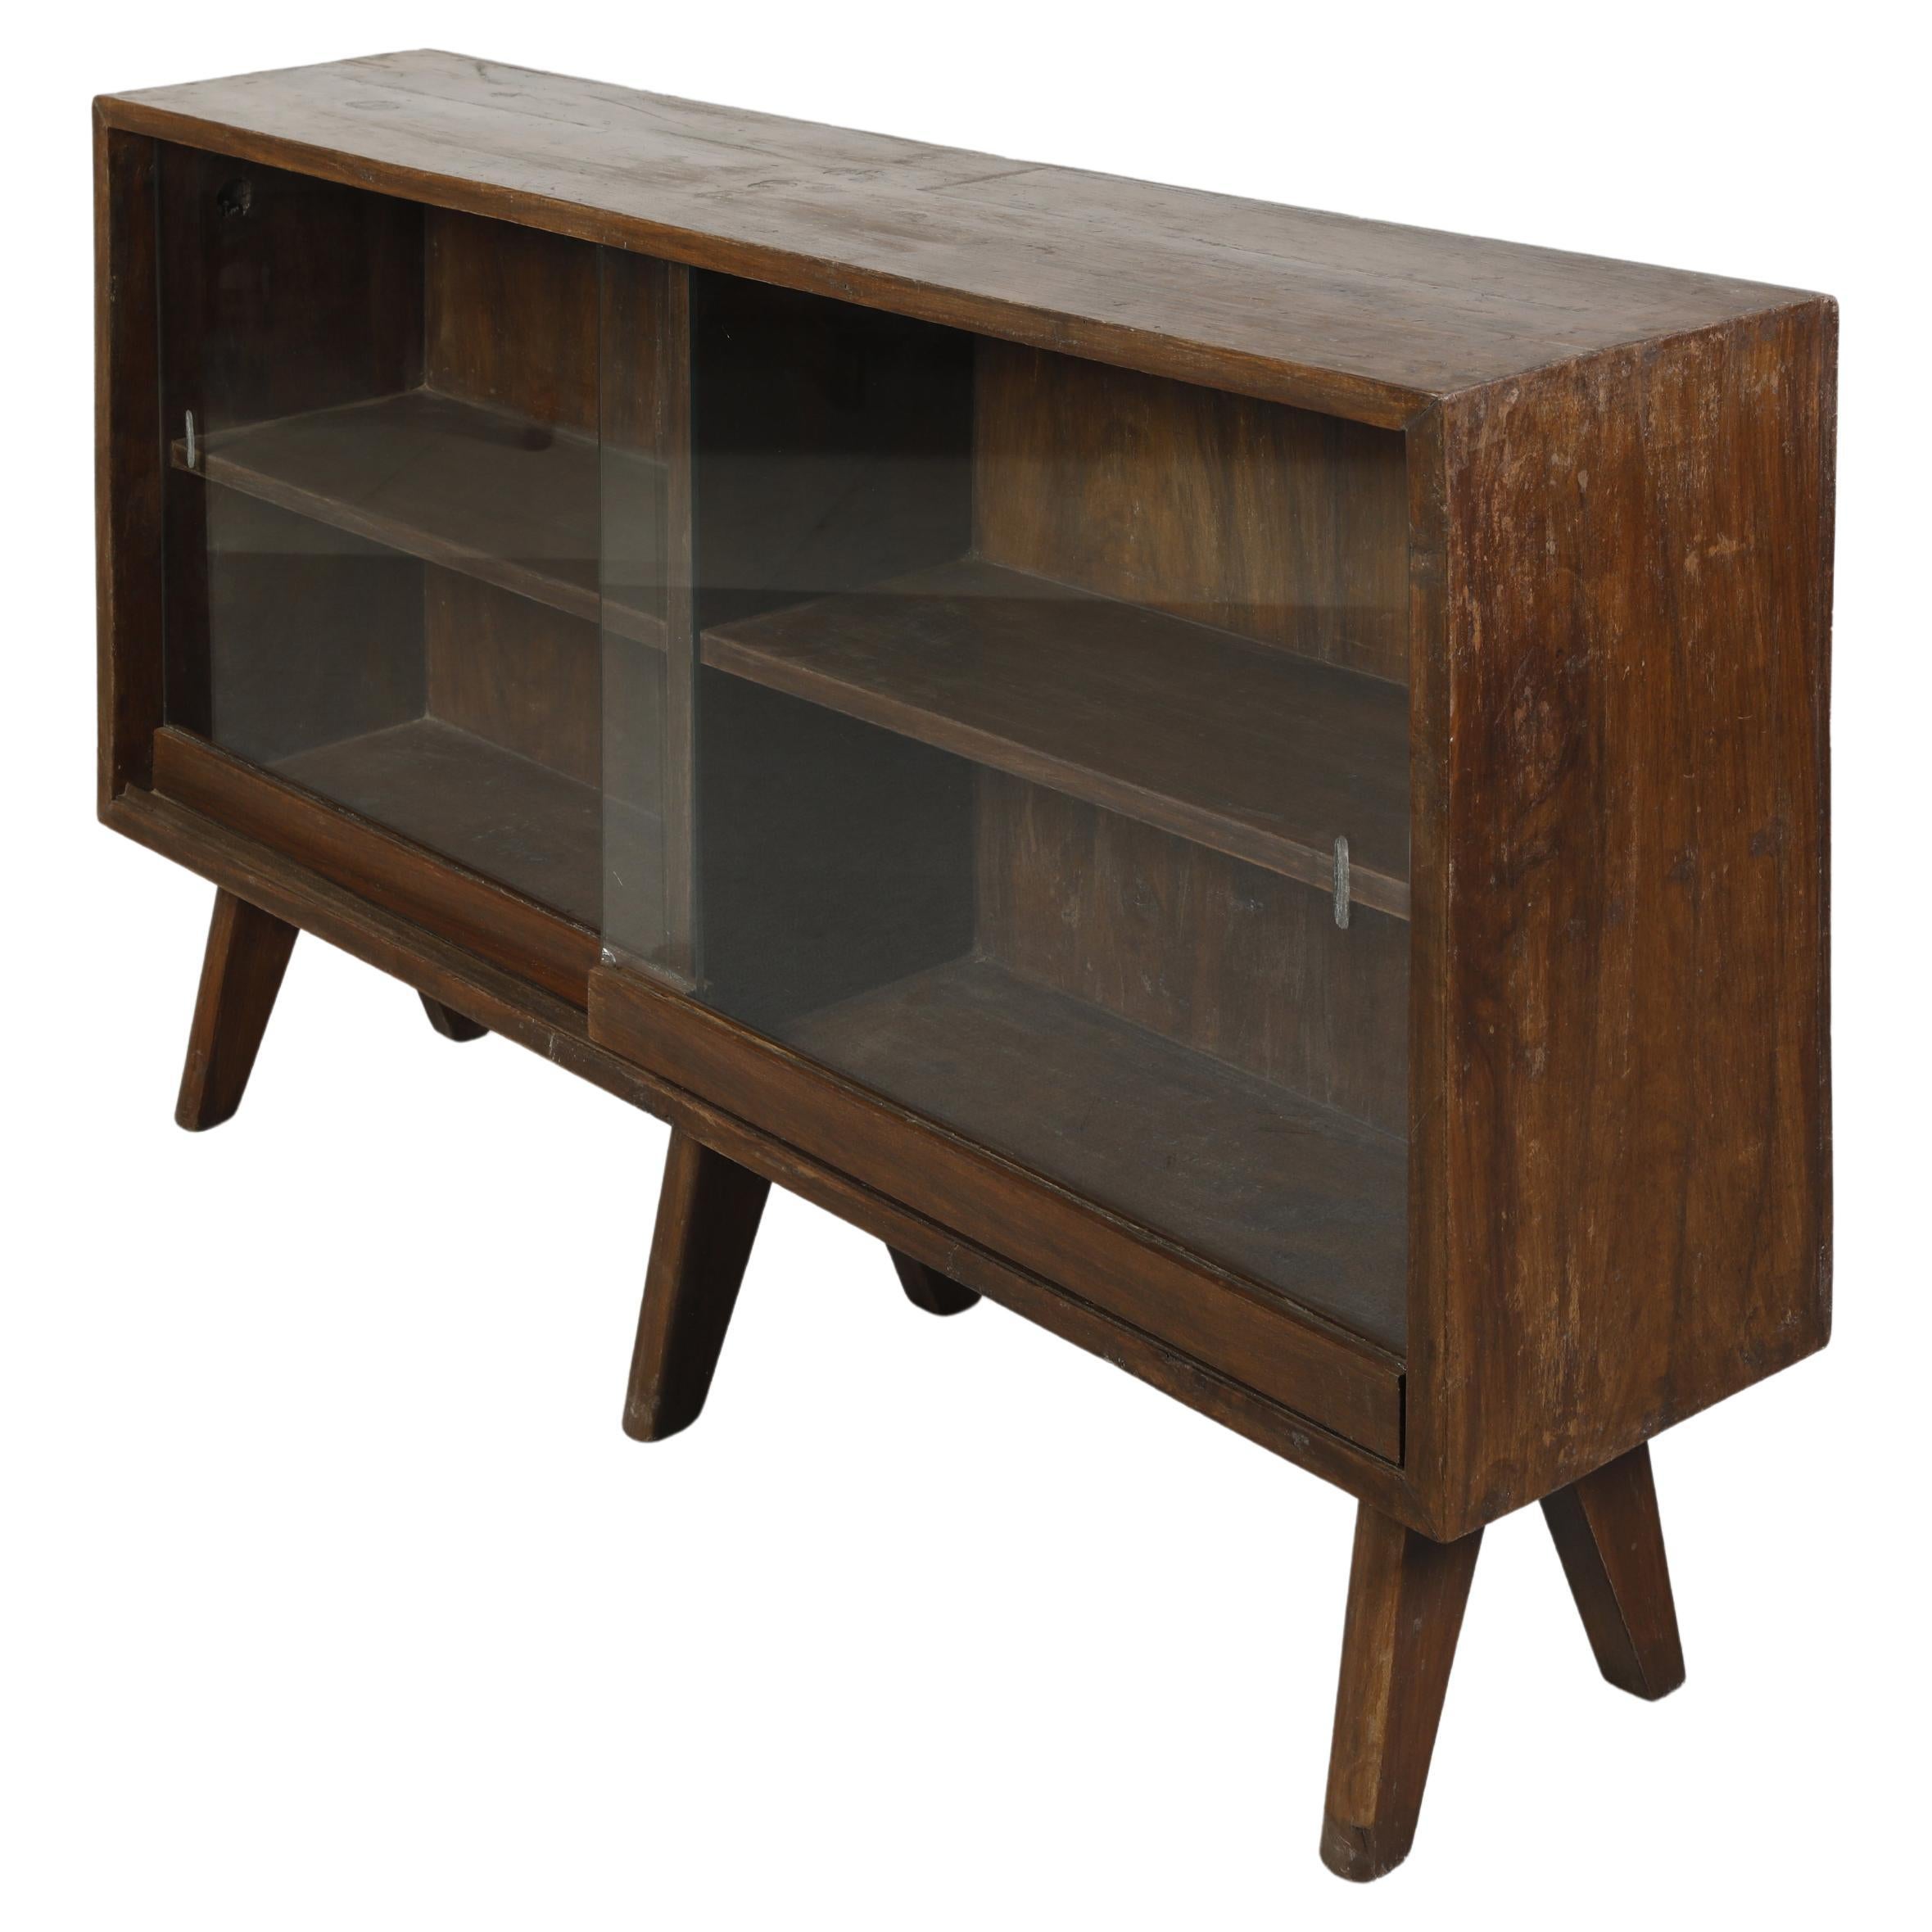 Pierre Jeanneret PJ-R-13-A Glass-Fronted Bookcase / Authentic Mid-Century Modern For Sale